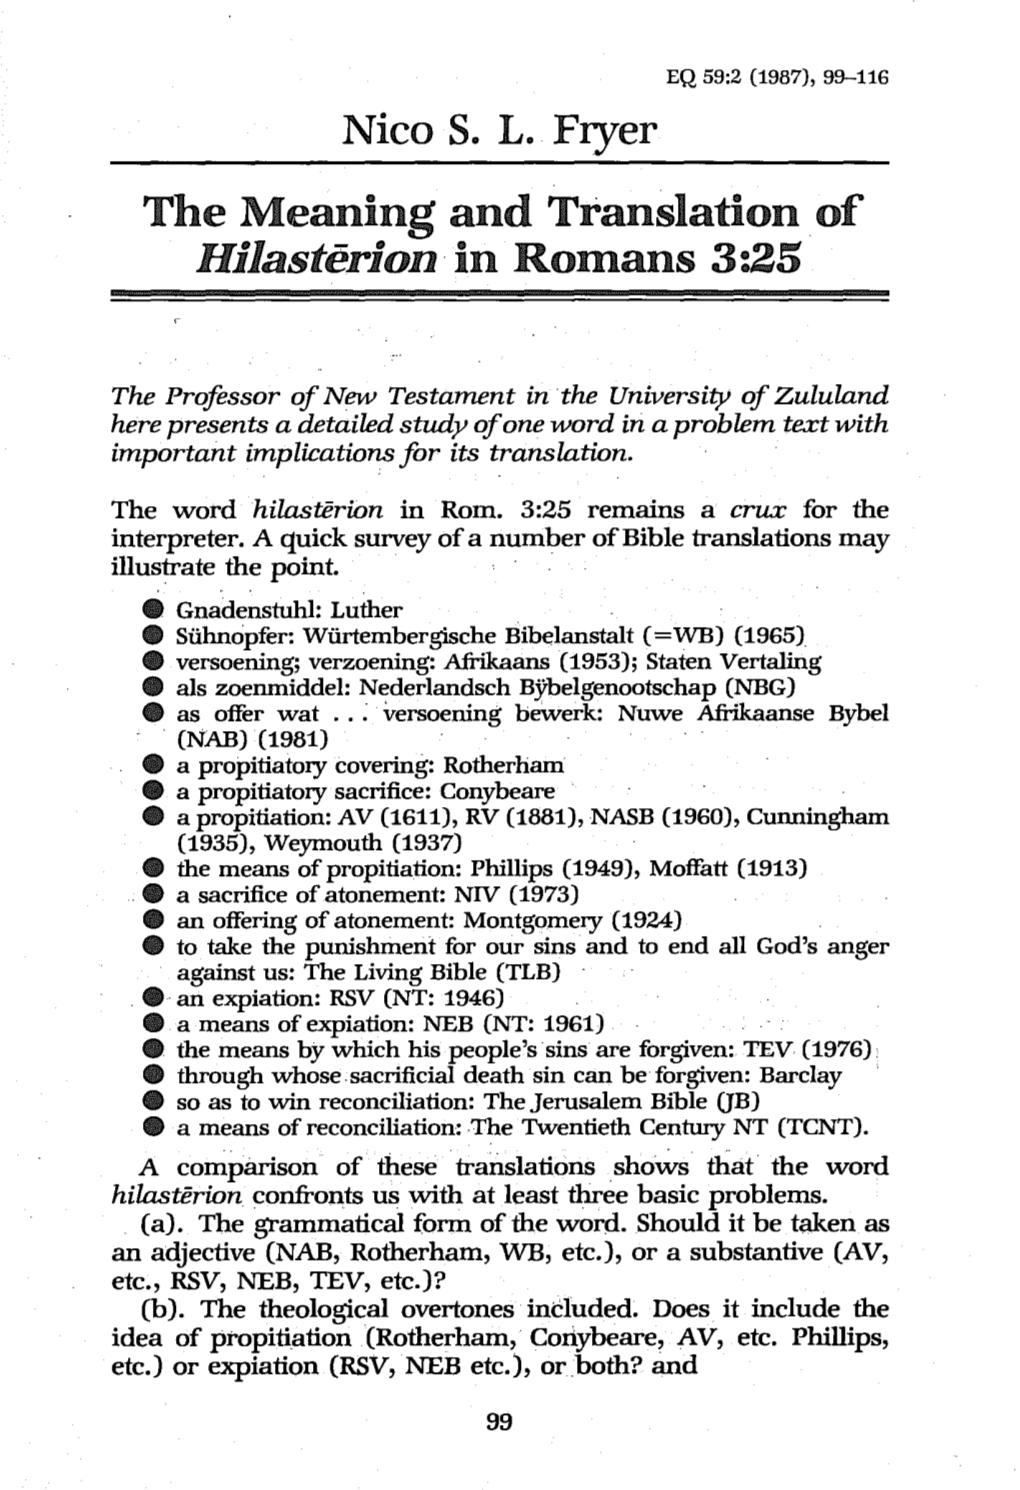 Nico S. L. Fryer the Meaning and Translation of Hilasterion in Romans 3:25